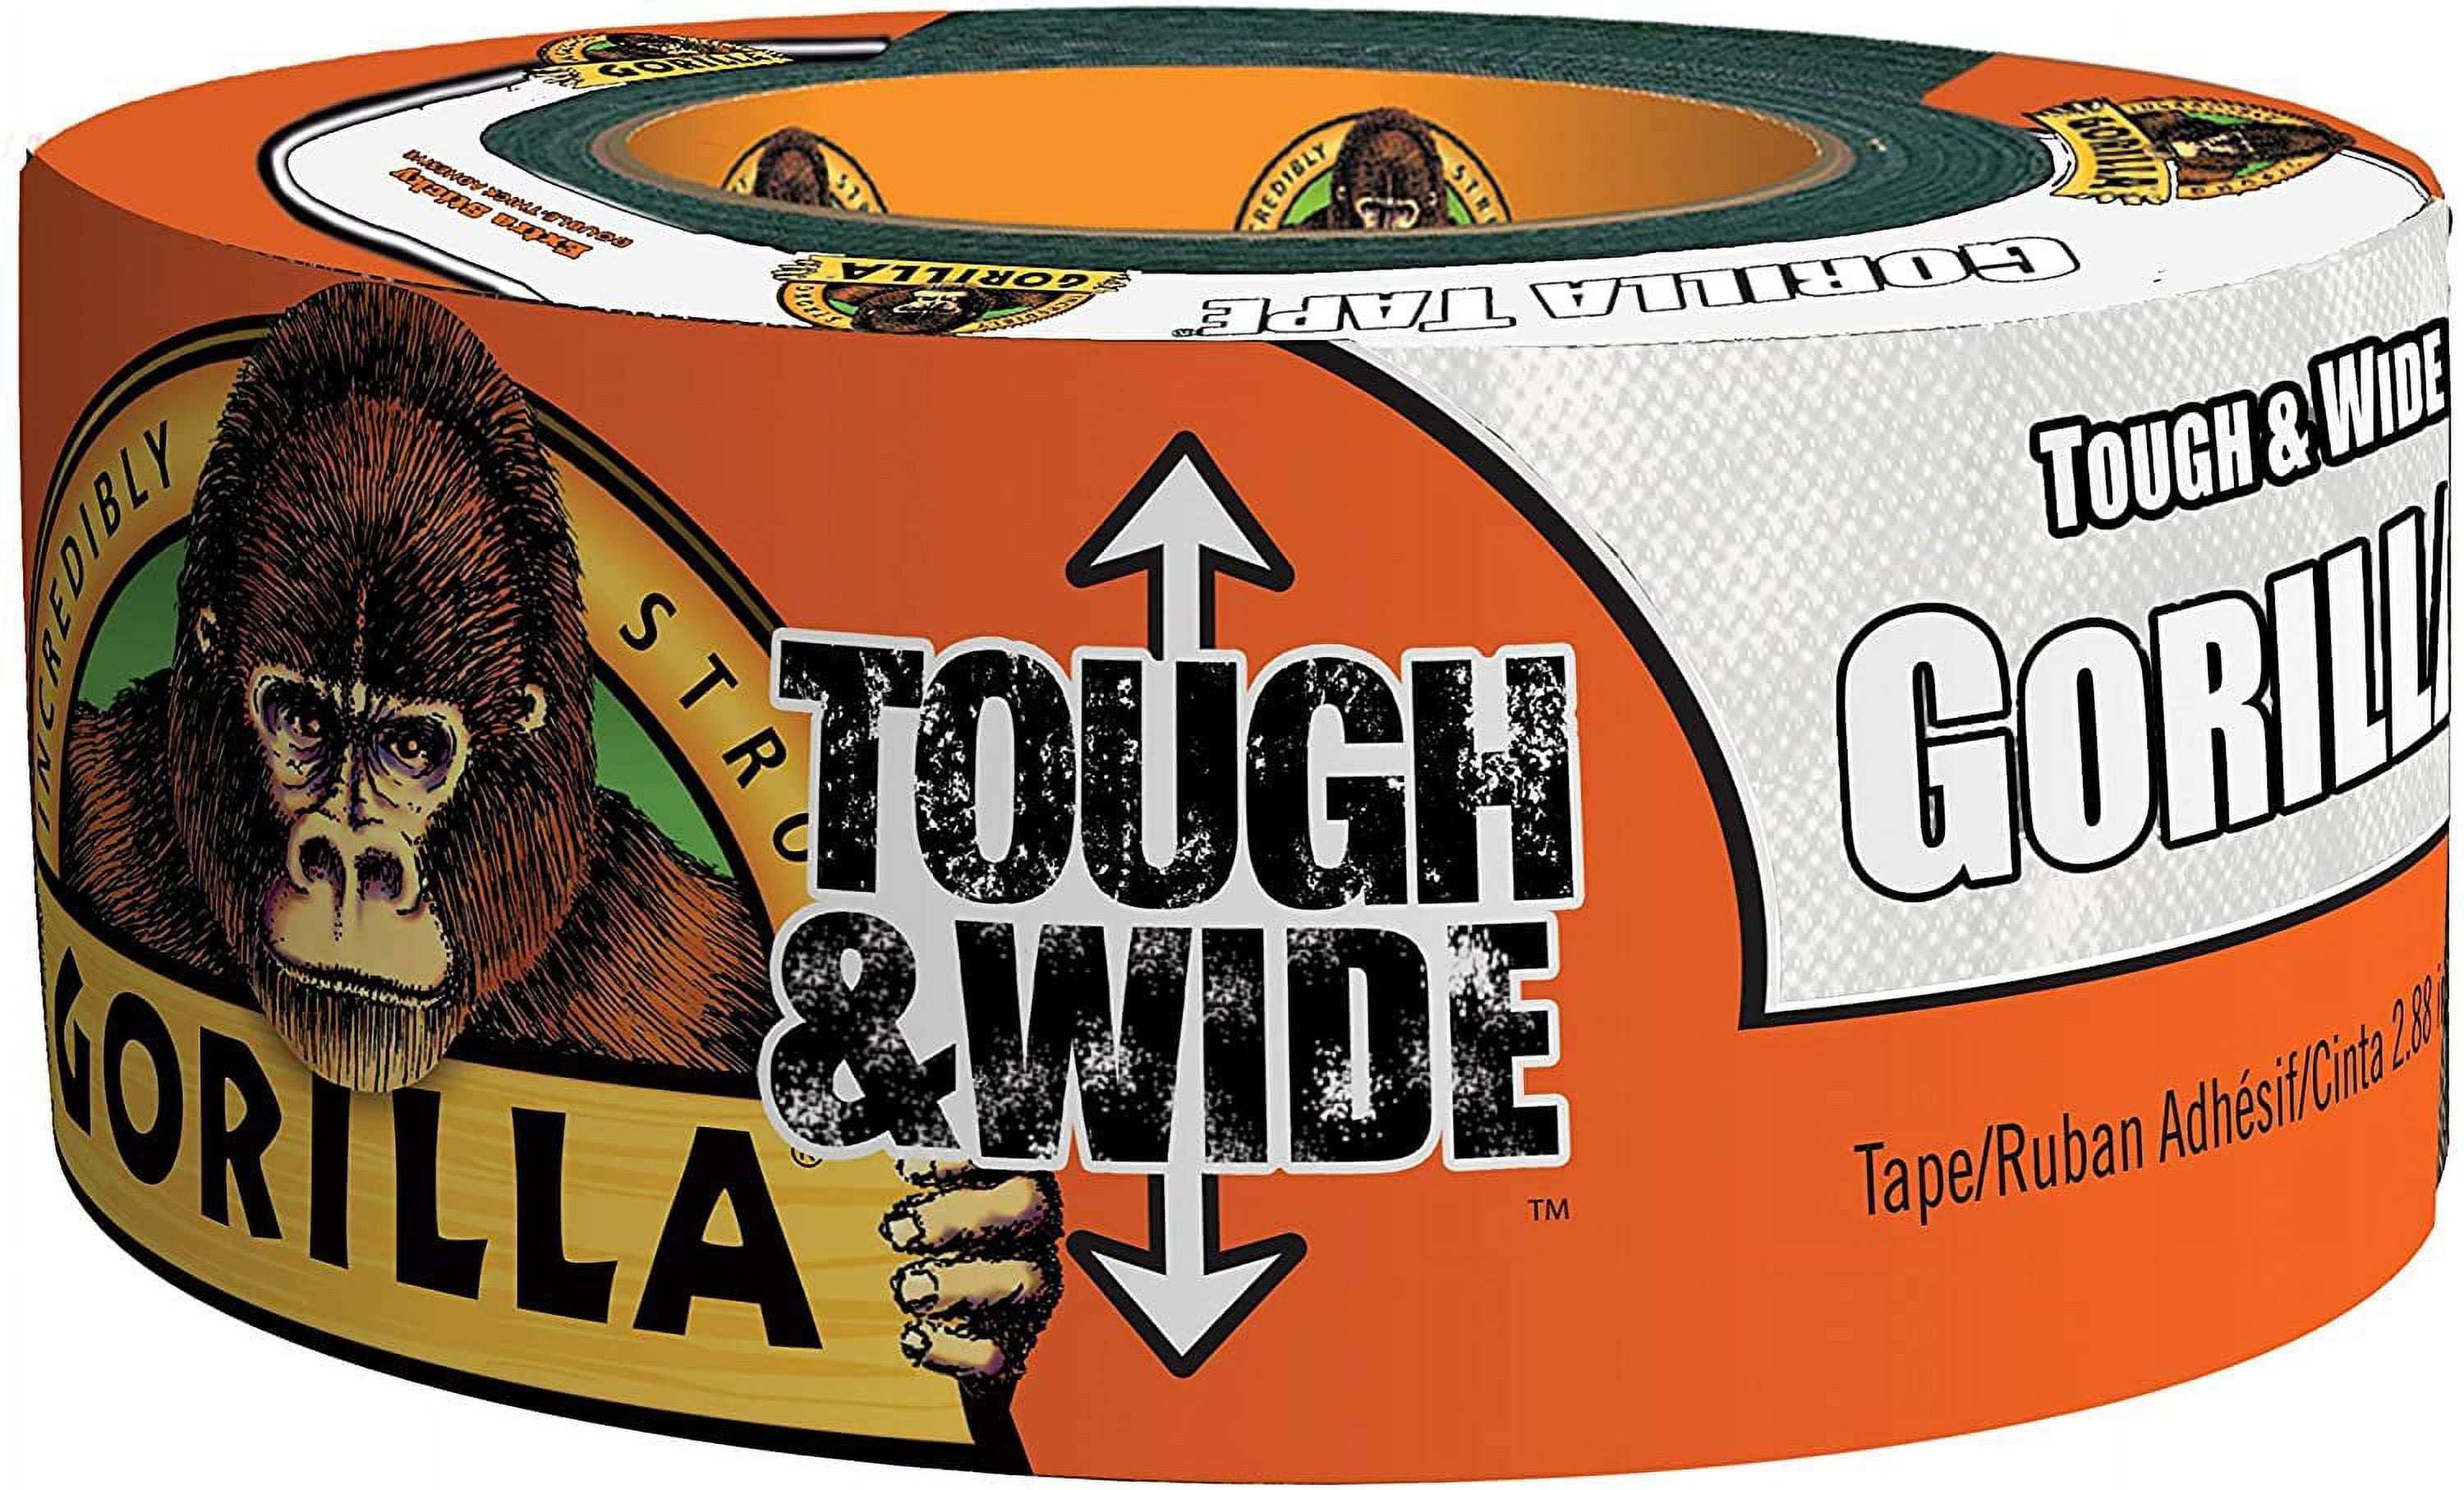 Gorilla All Weather Outdoor Waterproof Duct Tape, UV and Temperature  Resistant, 1.88 x 25 yd, Black, (Pack of 1)